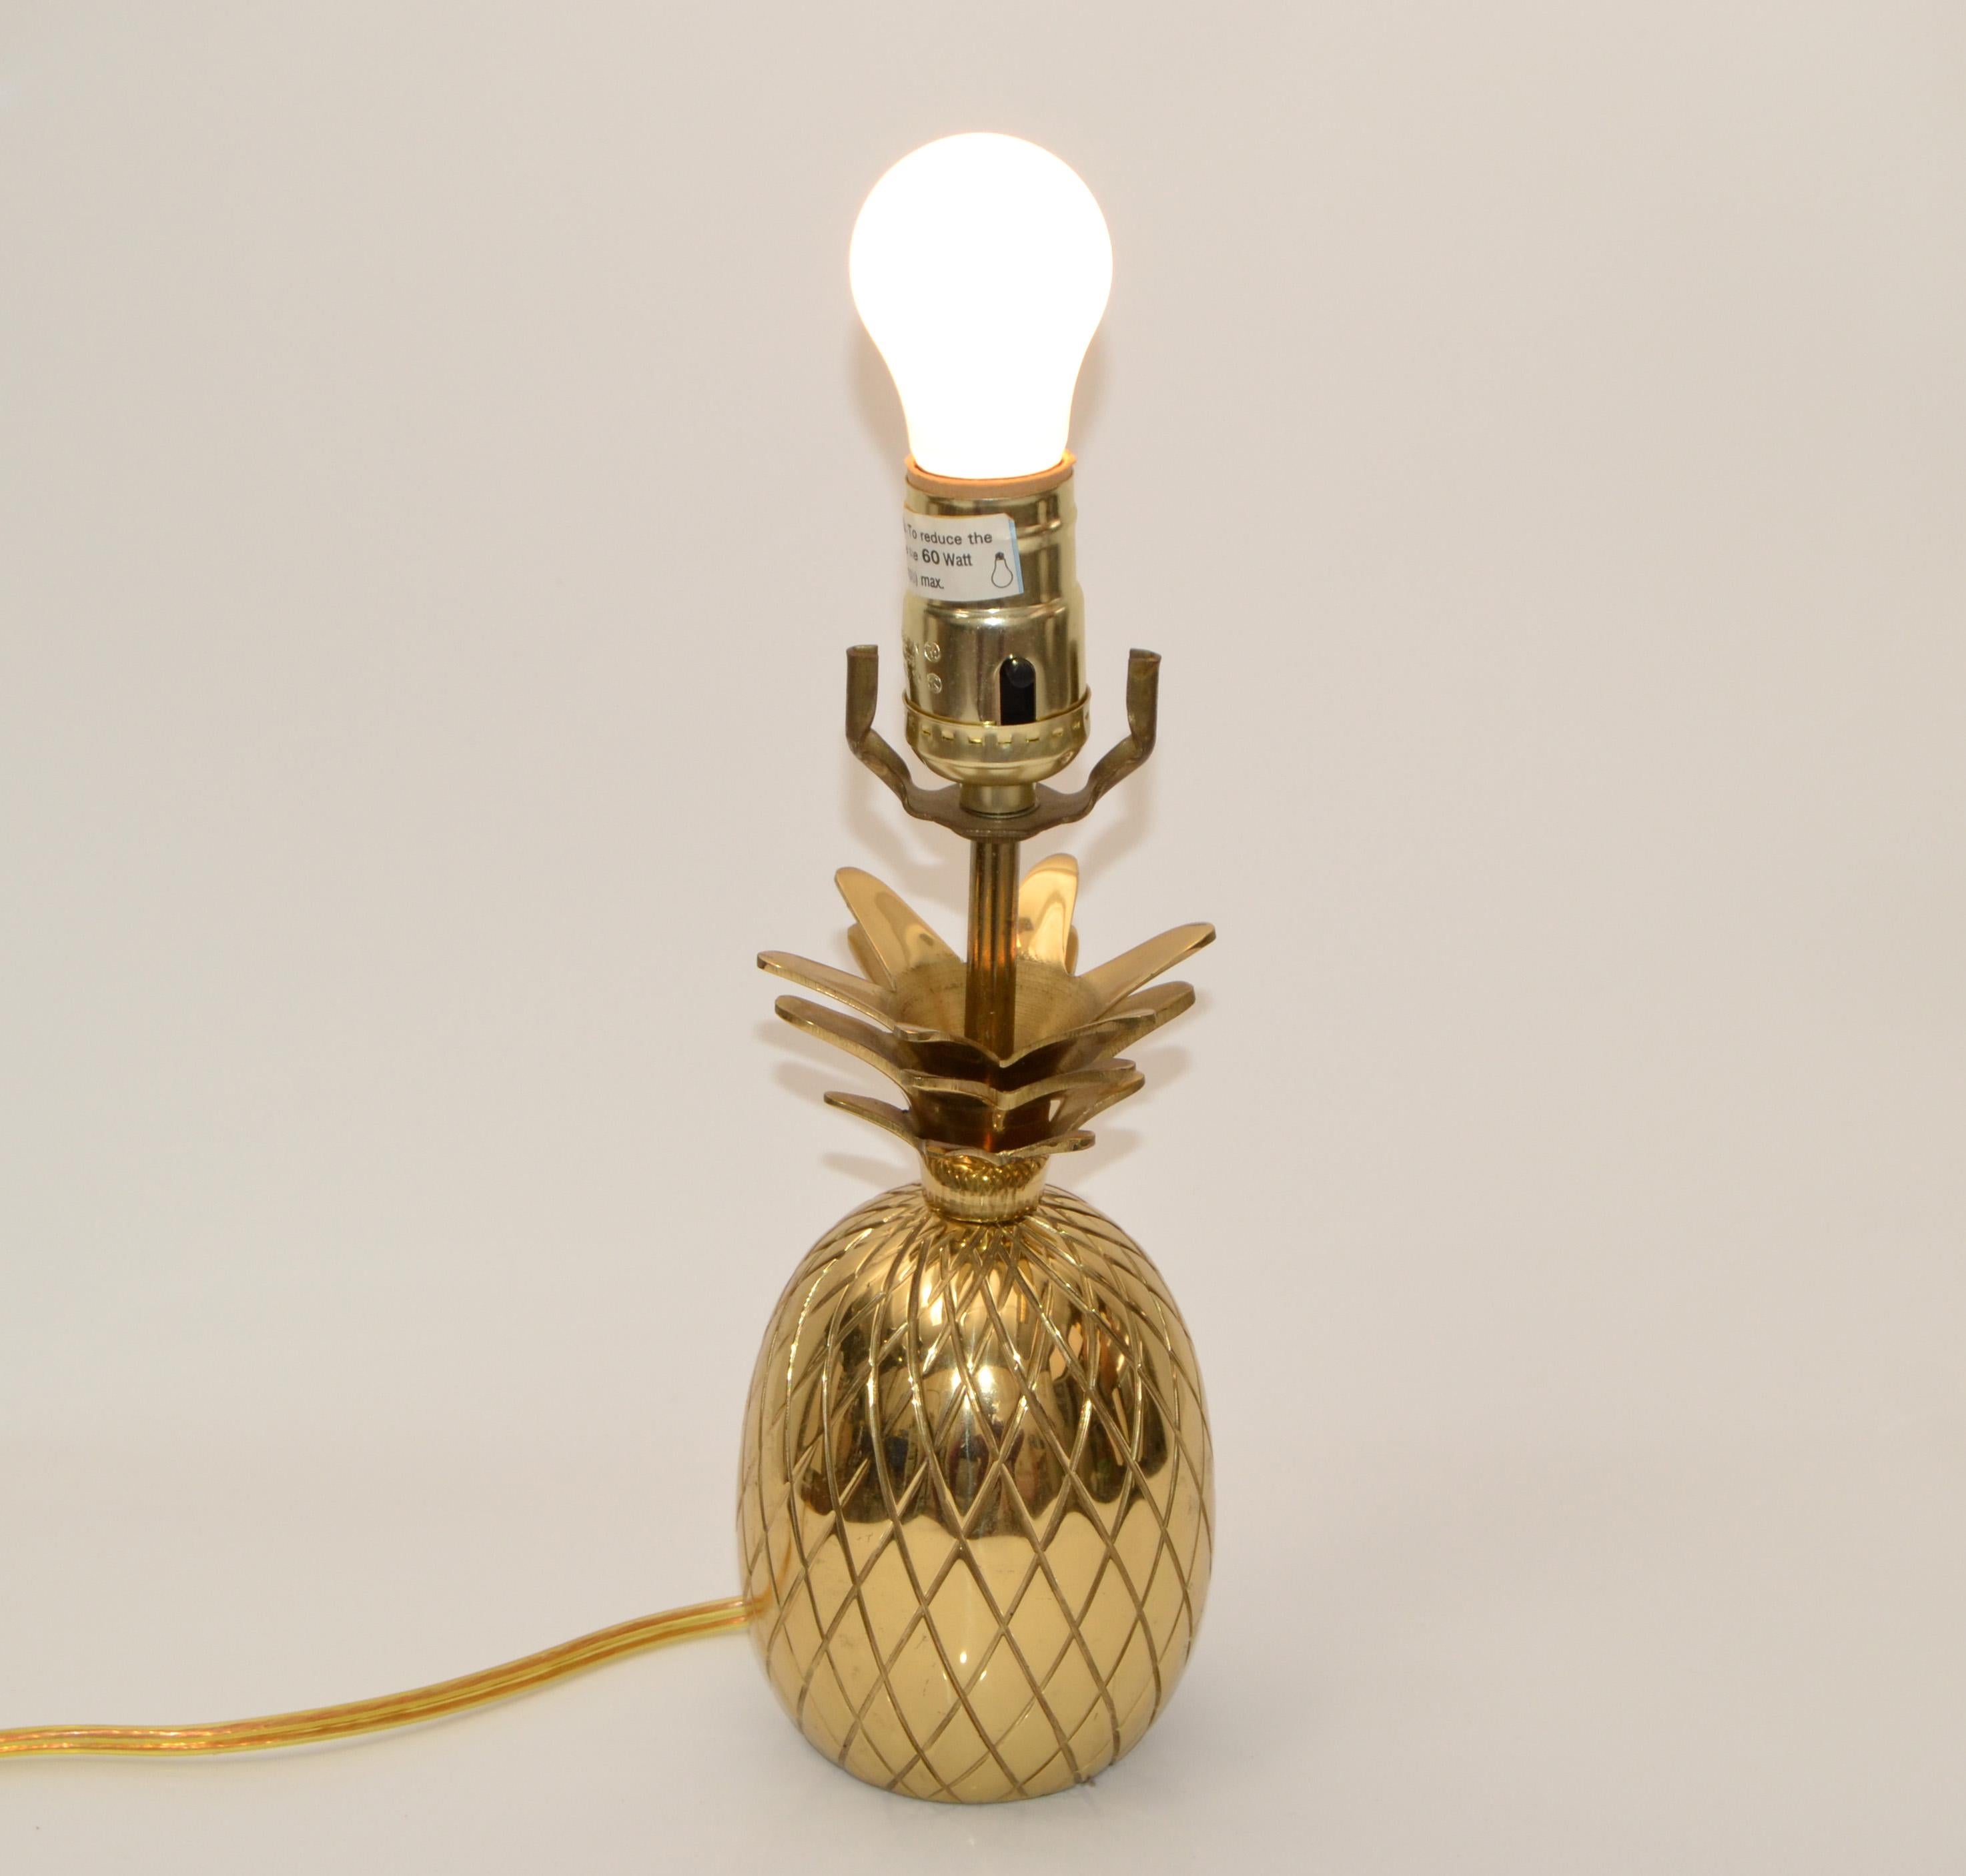 Small Hollywood Regency sculptural polished bronze pineapple table lamp or Bedside Table Light.
Has a felt cover to the base.
Wired for the U.S. with perfect working 3-way function.
No shade, Harp, Finial.